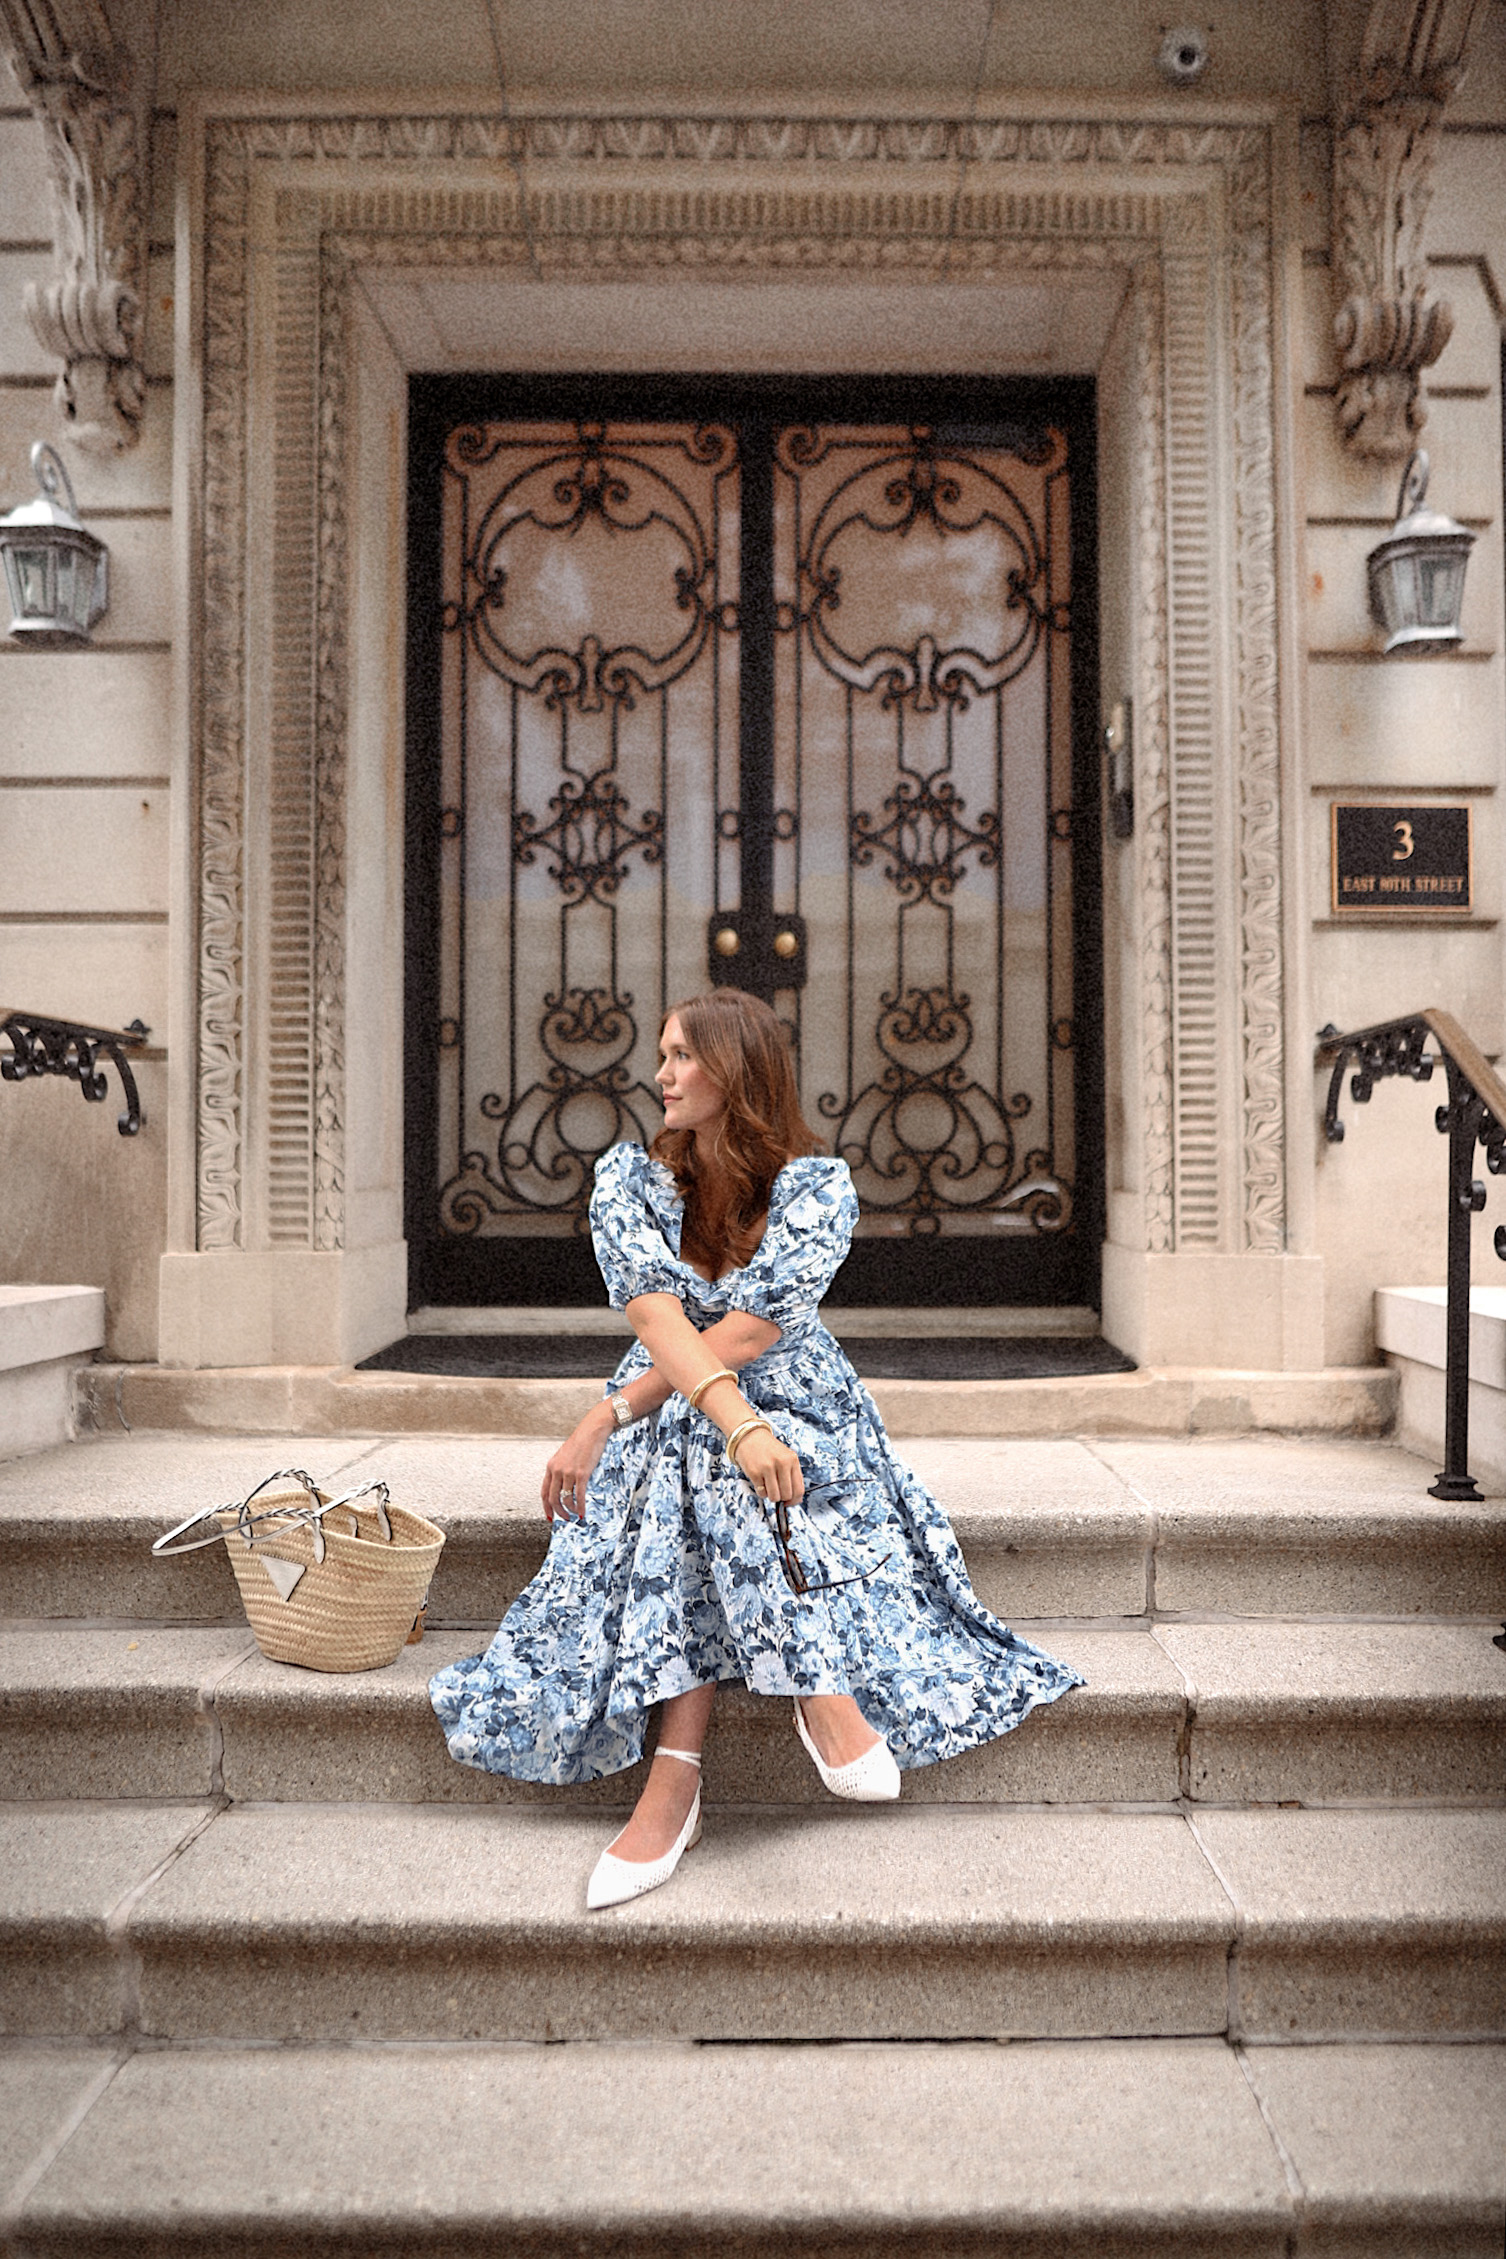 Anna on stoop in blue Abercrombie dress.